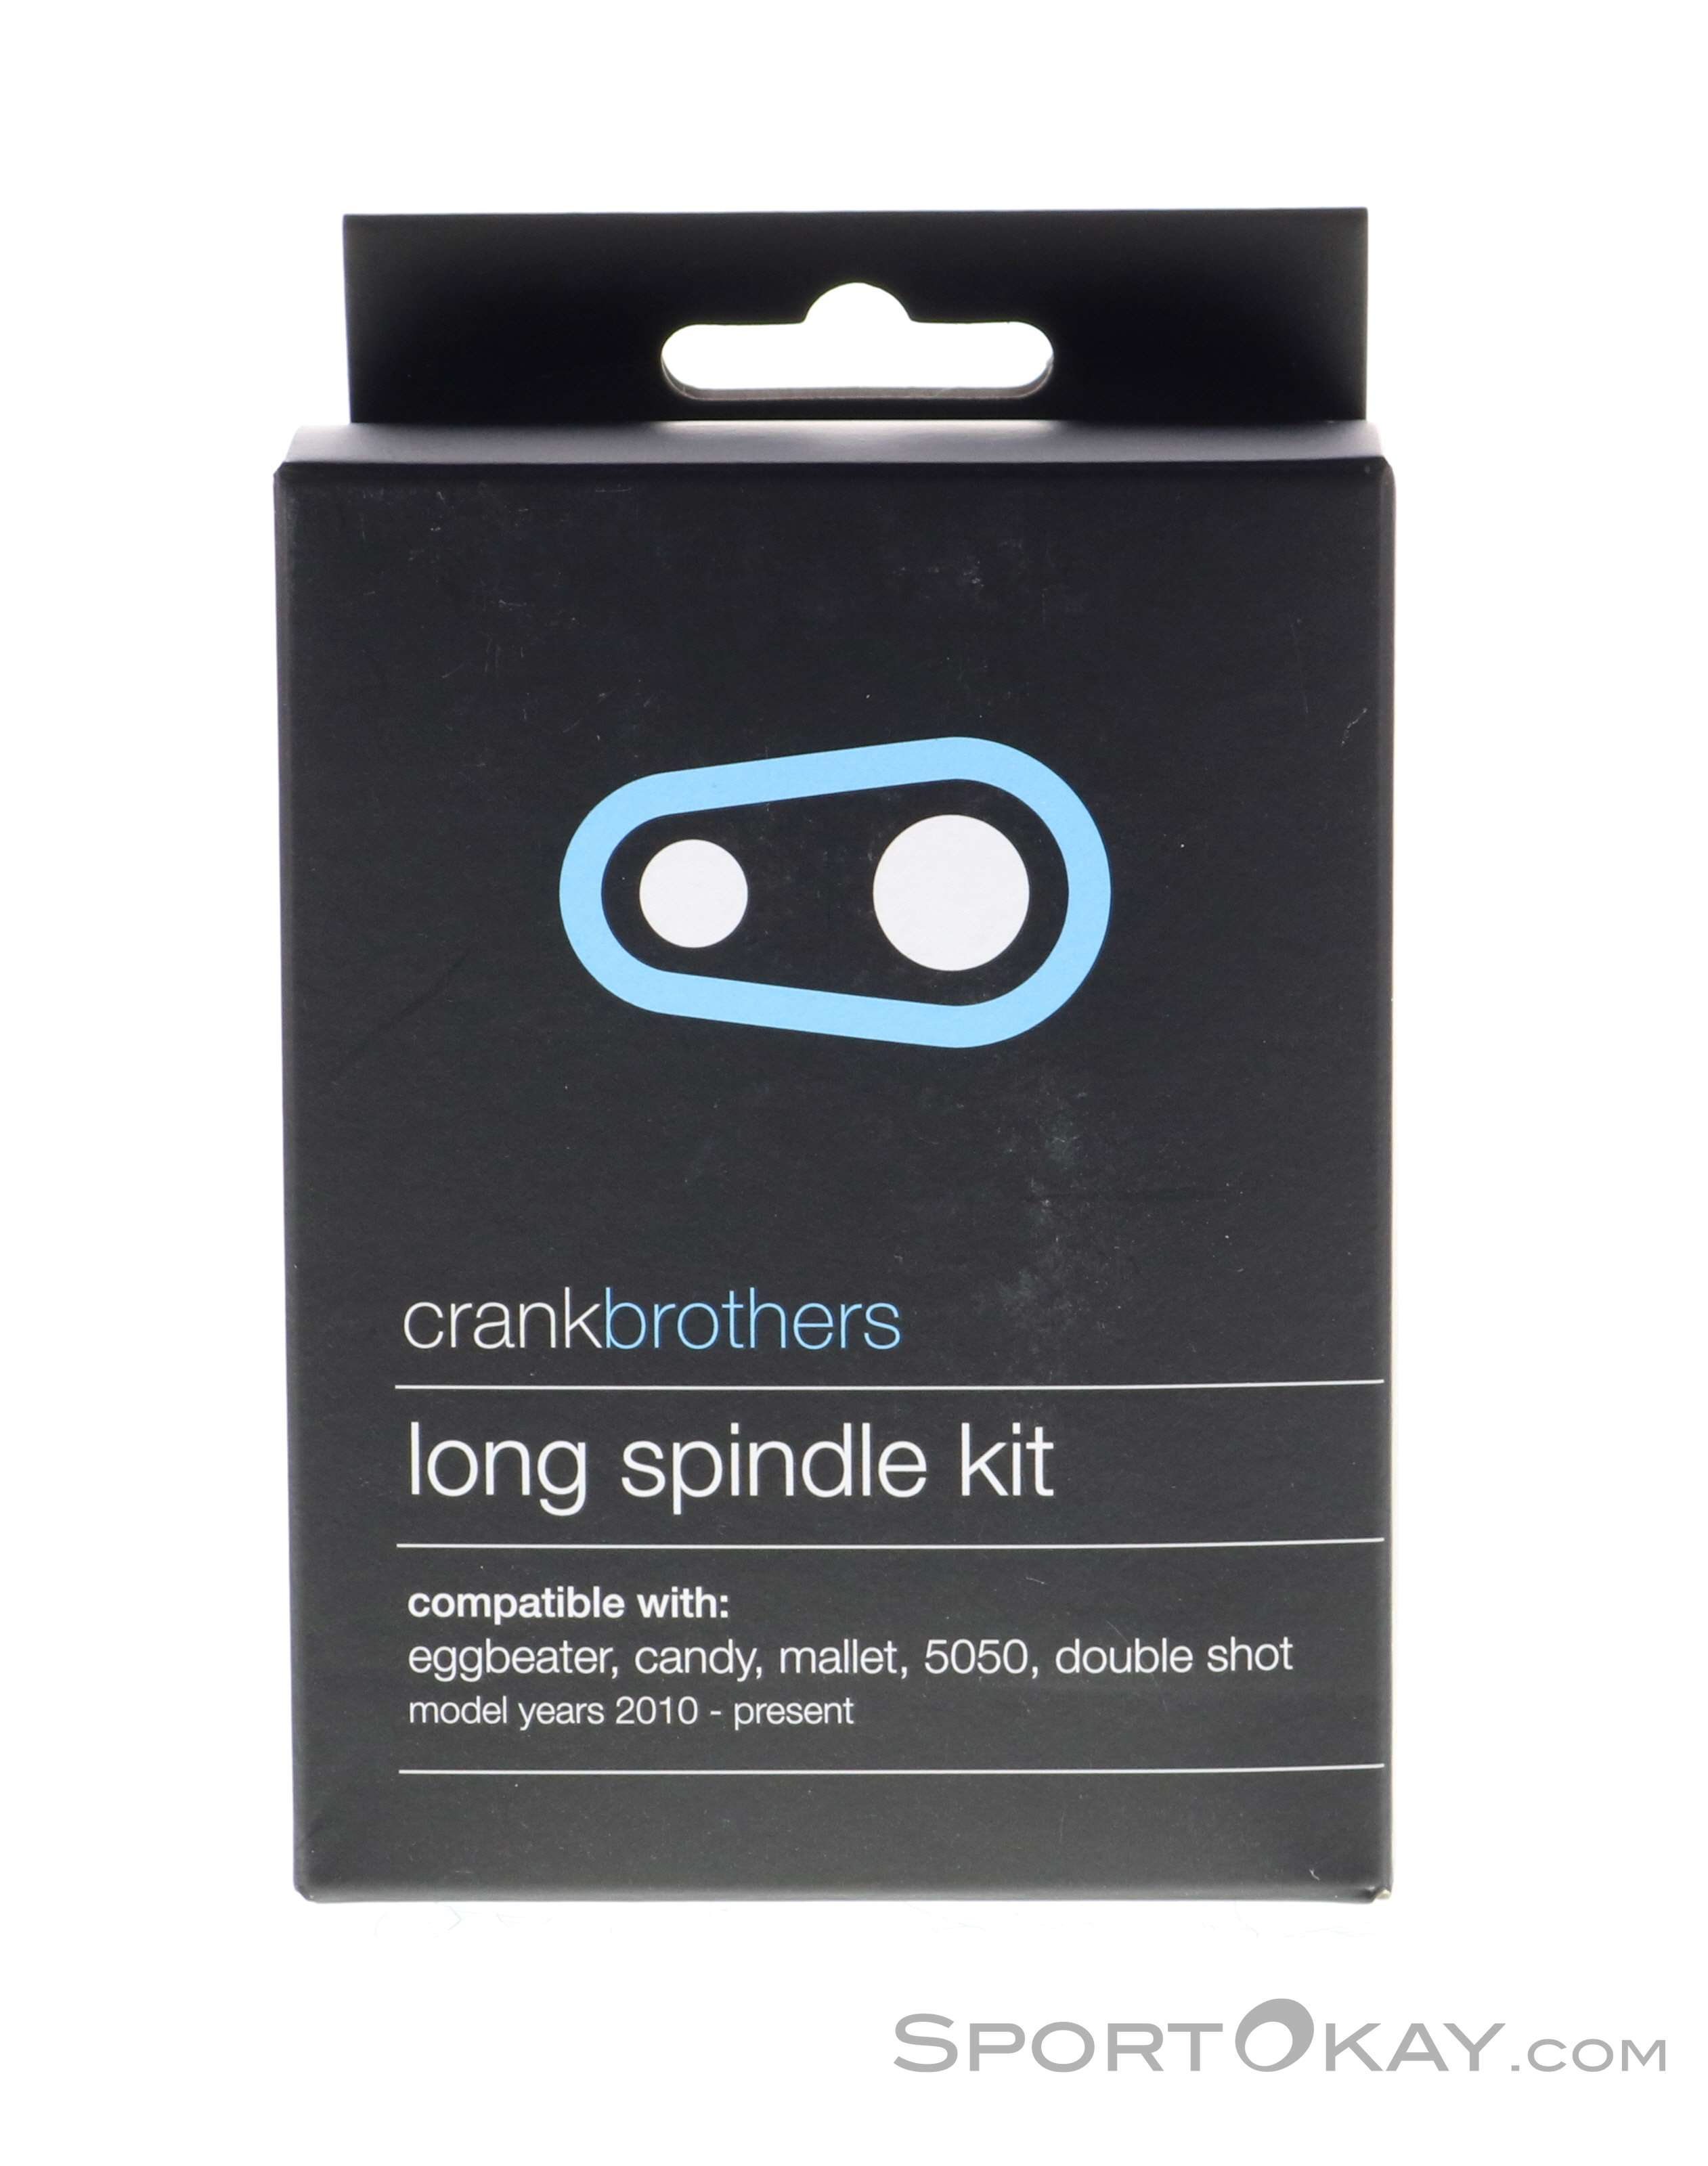 Doubleshot: 2 pedal axles in titanium! Crankbrothers EggBeater Candy Mallet 